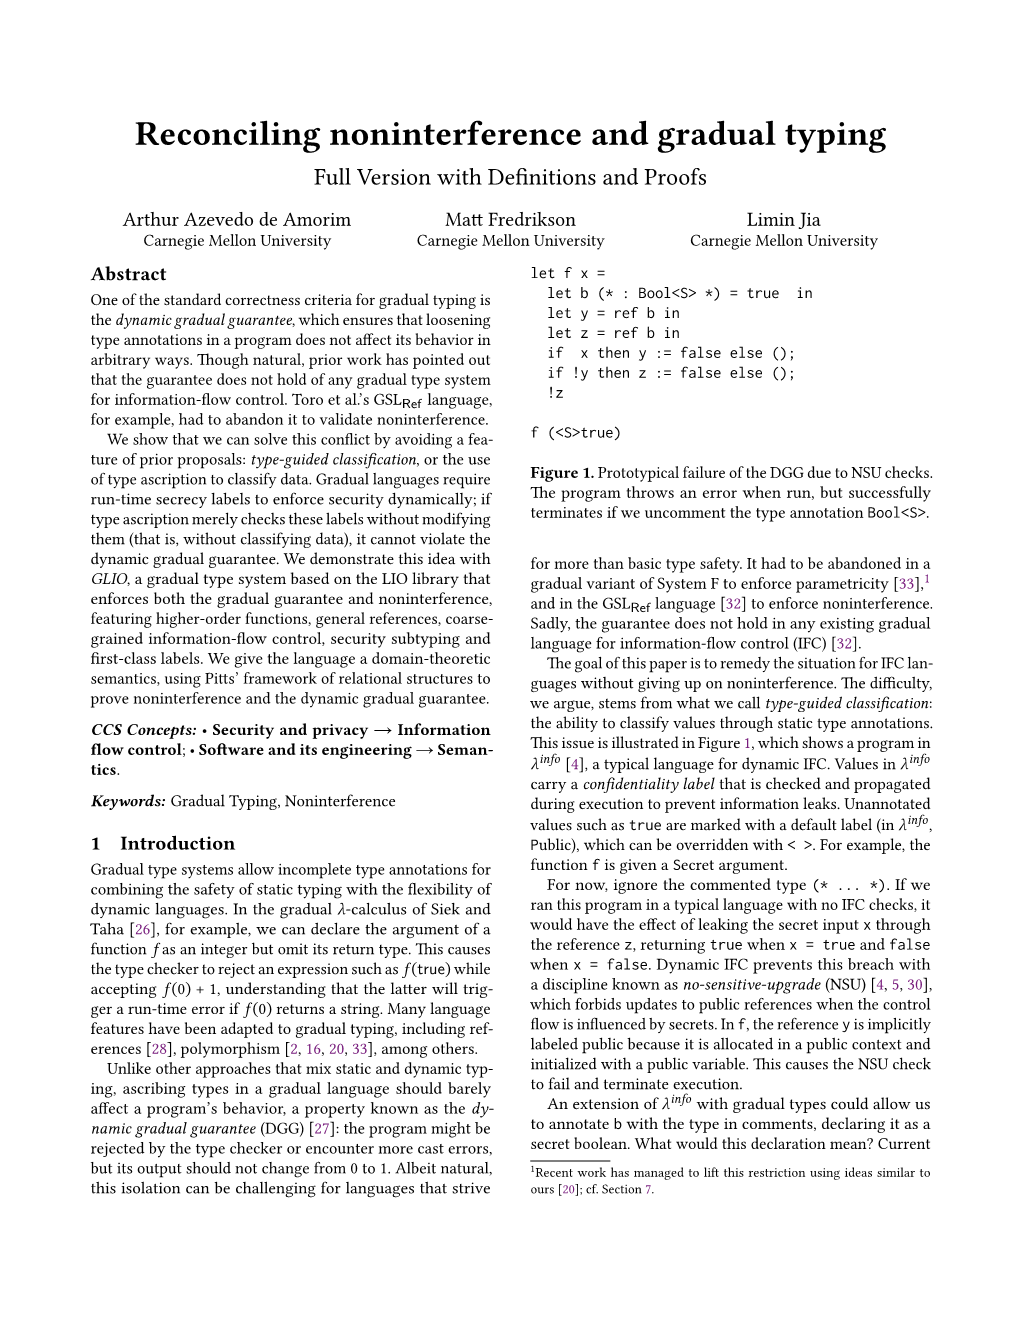 Reconciling Noninterference and Gradual Typing Full Version with Definitions and Proofs